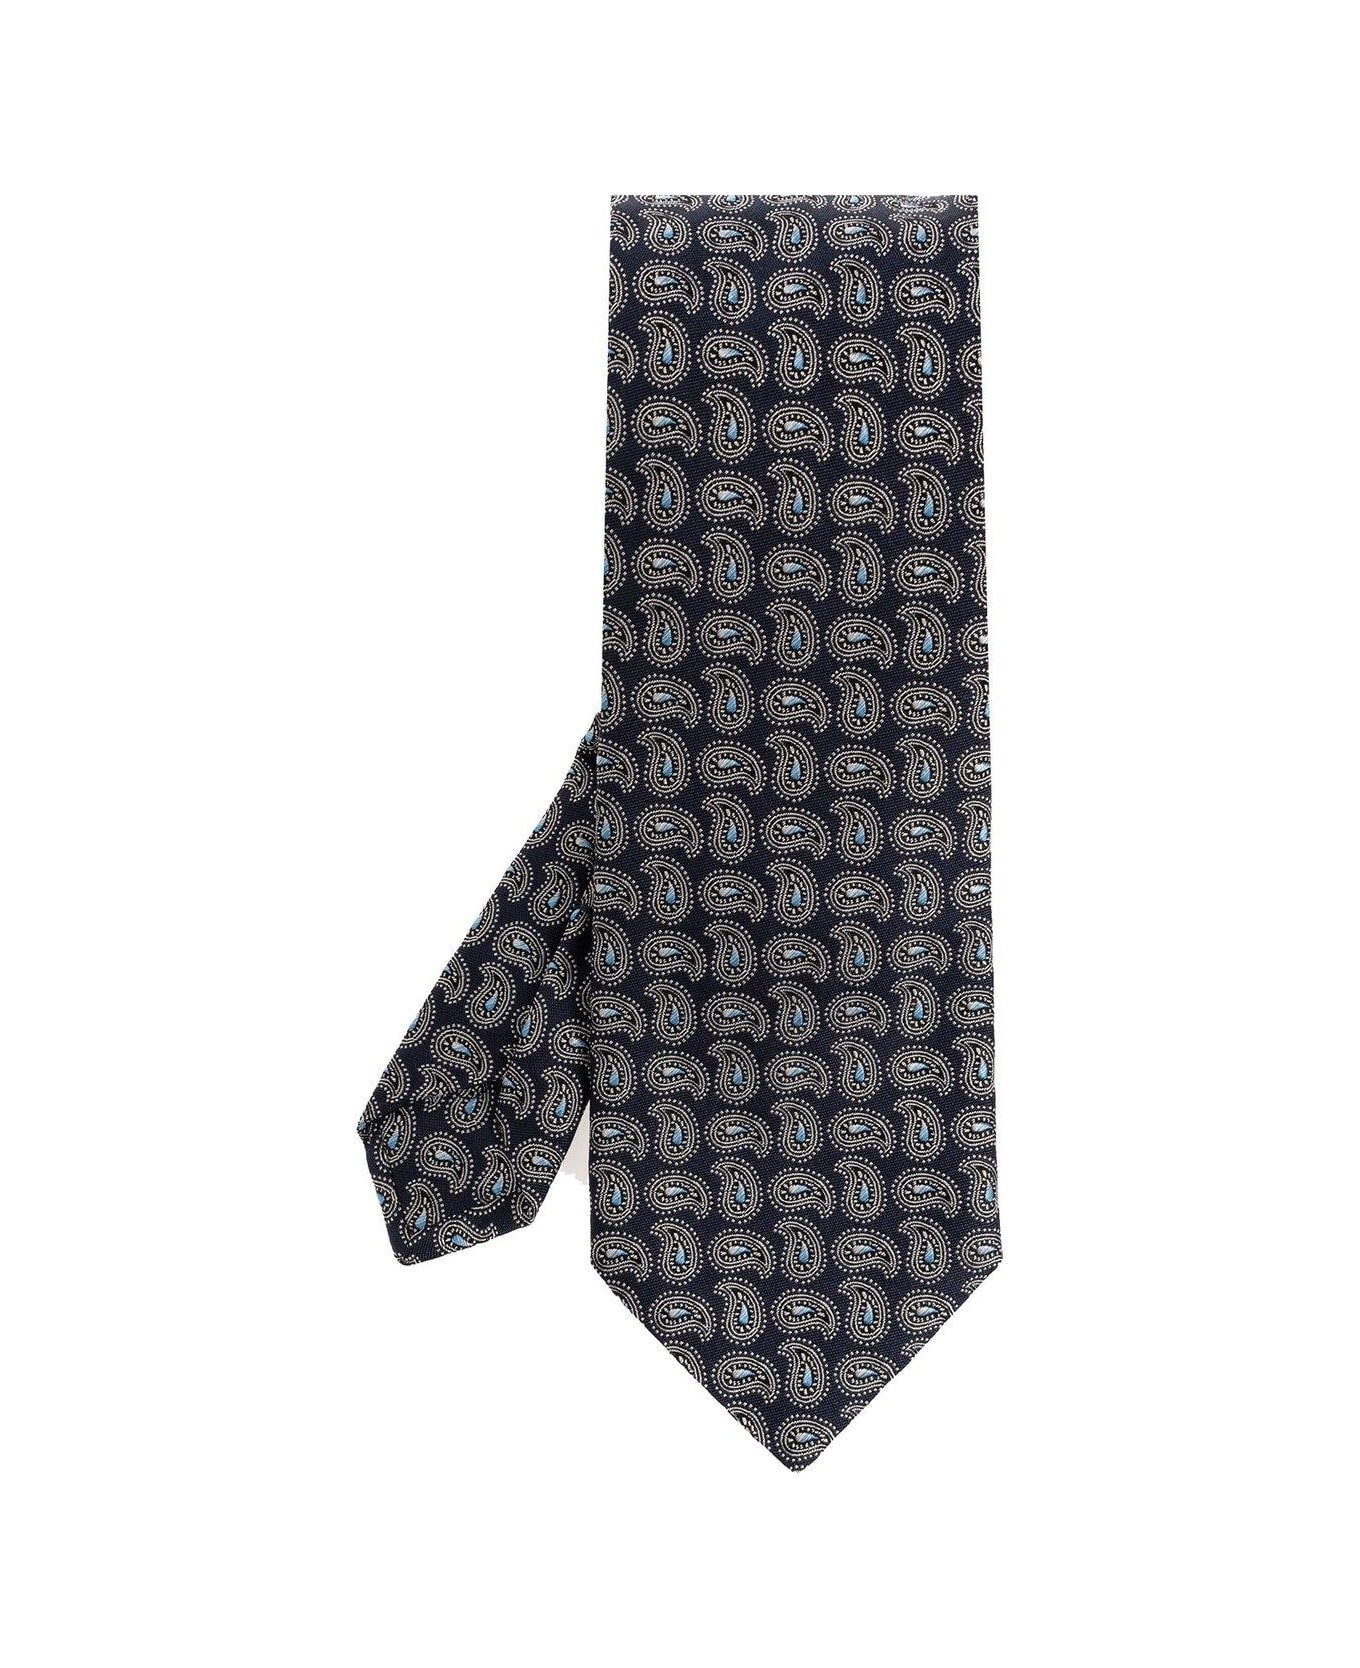 Patterned Tie - 1